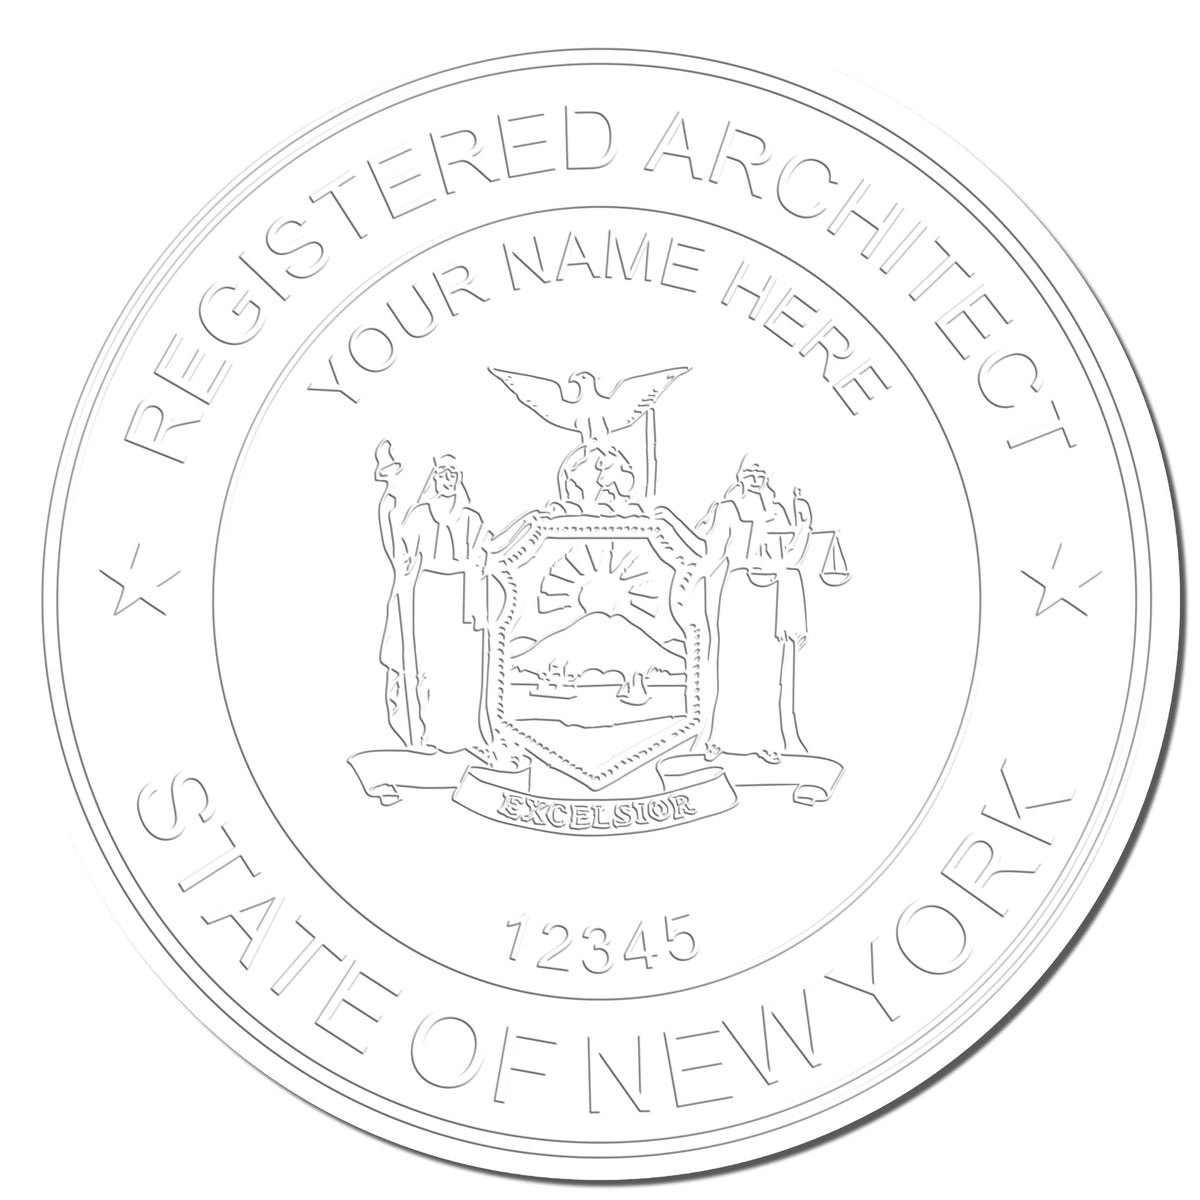 A stamped impression of the State of New York Long Reach Architectural Embossing Seal in this stylish lifestyle photo, setting the tone for a unique and personalized product.